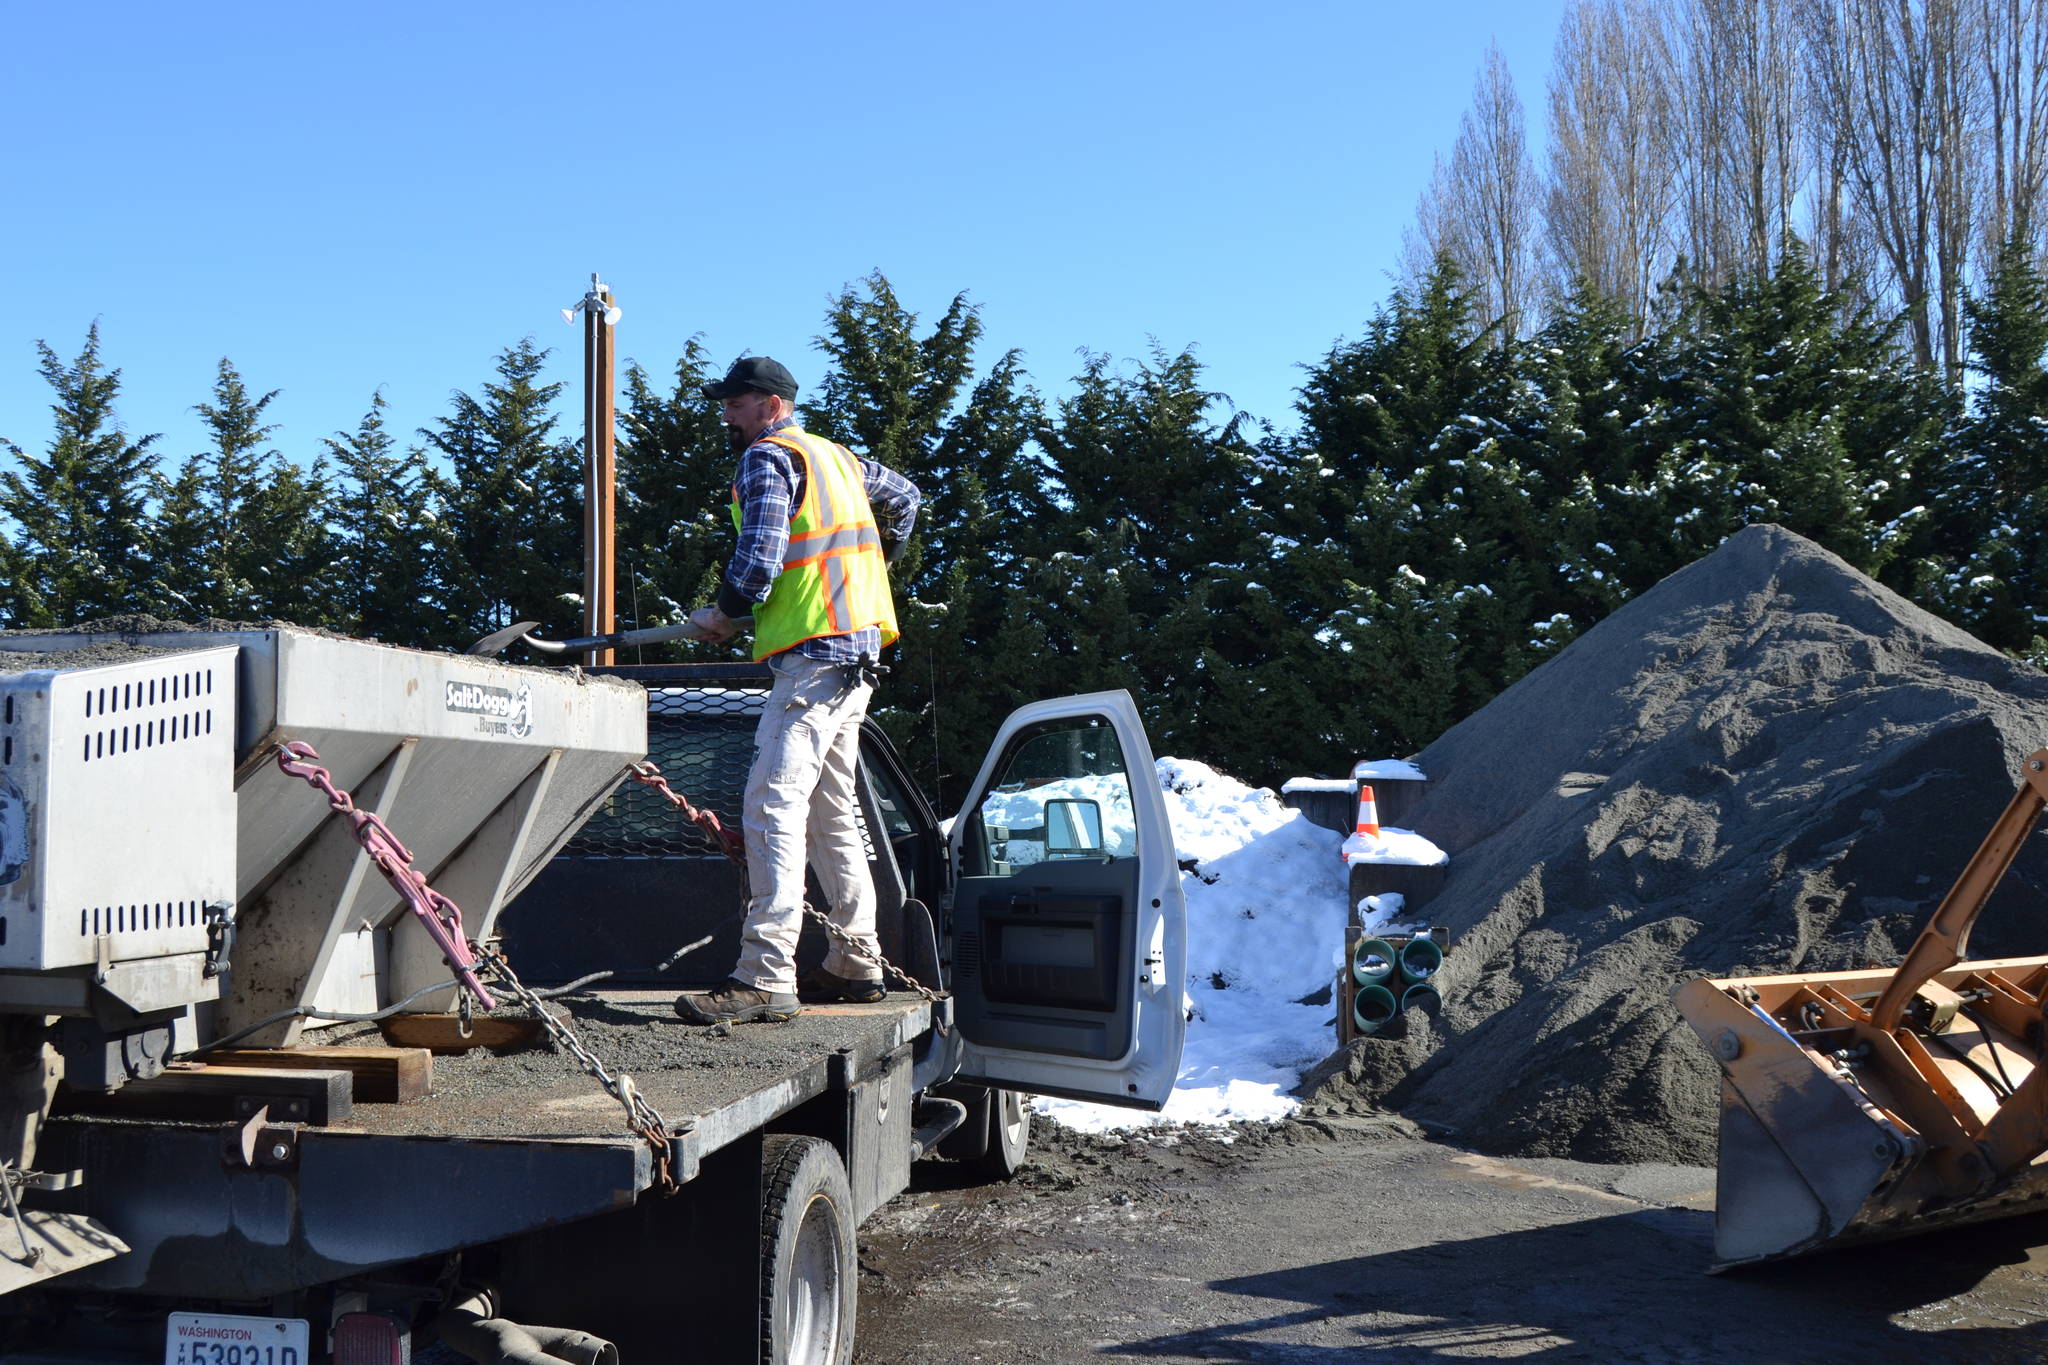 Hank Arnold, a maintenance worker for the City of Sequim, loads sand into his spreader at the City Shop before taking to the city streets to make roadways safer to drive on Feb. 23. Arnold drove one of five city trucks with plows and sand spreaders during the recent snowfall. Sequim Gazette photo by Matthew Nash